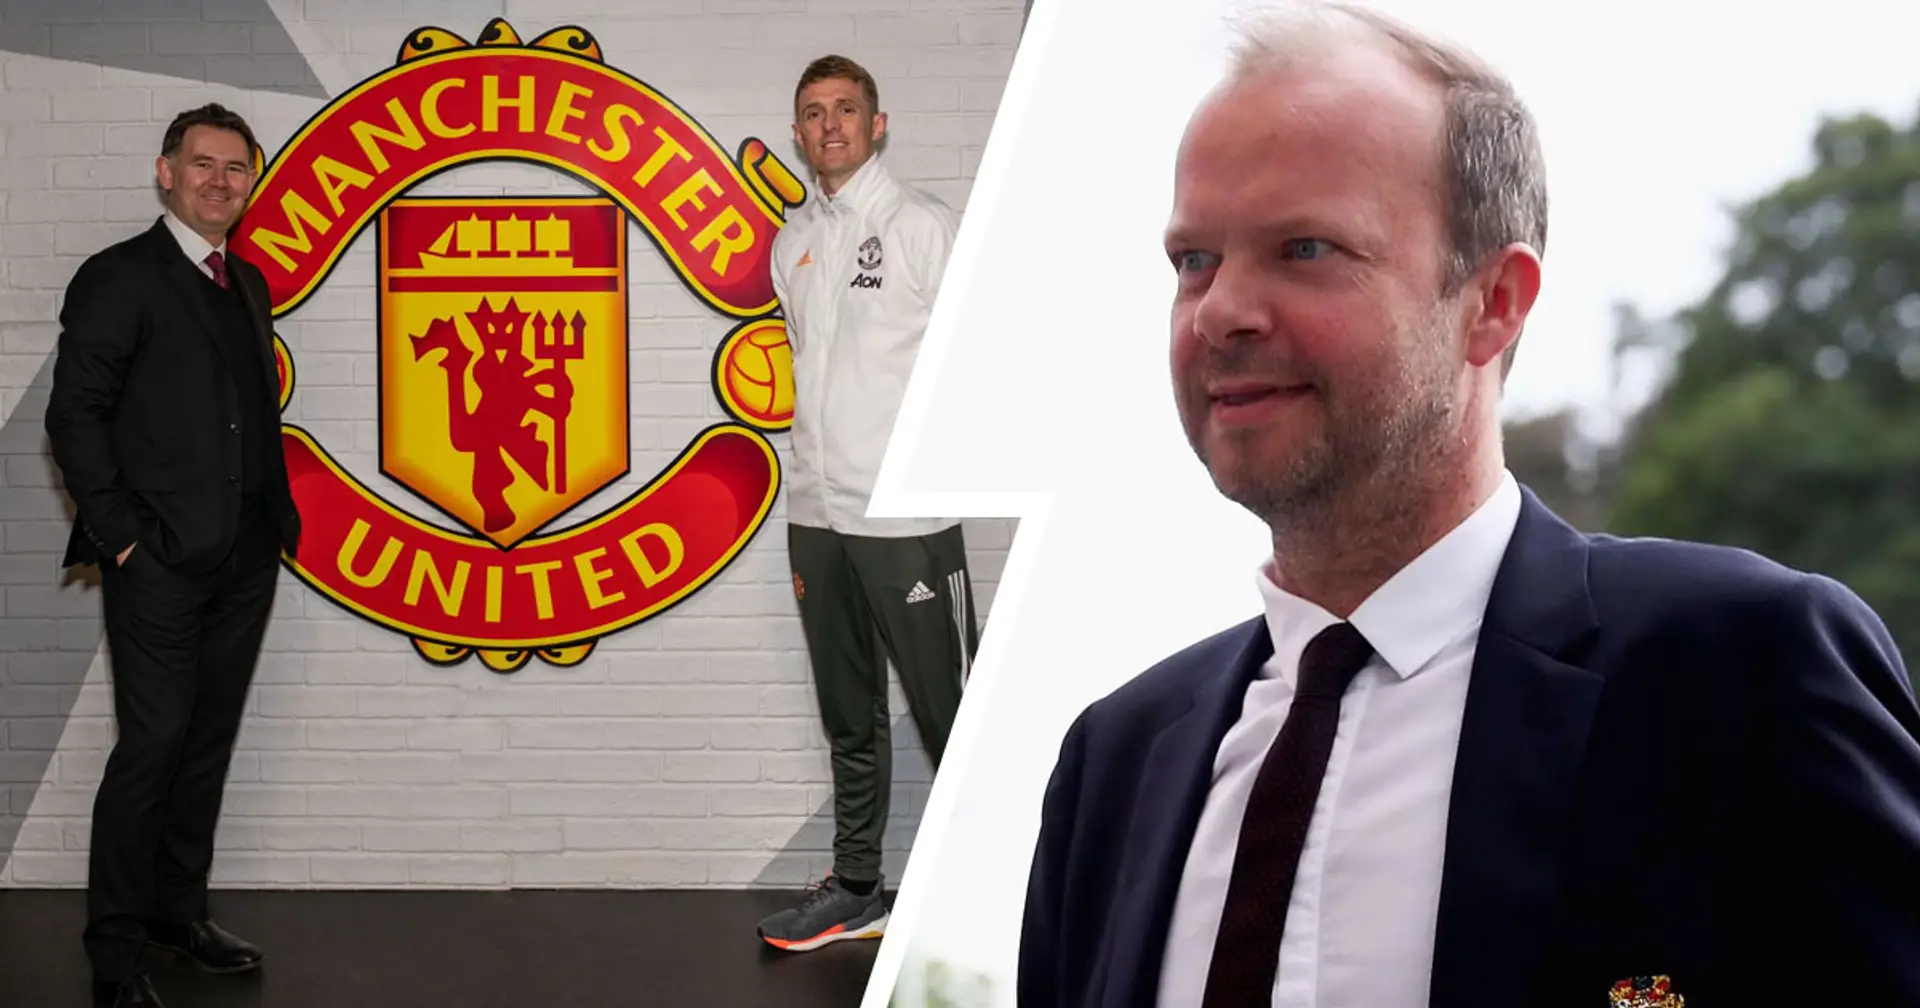 ‘These are hugely important appointment’: Ed Woodward on choosing John Murtough as new Director of Football